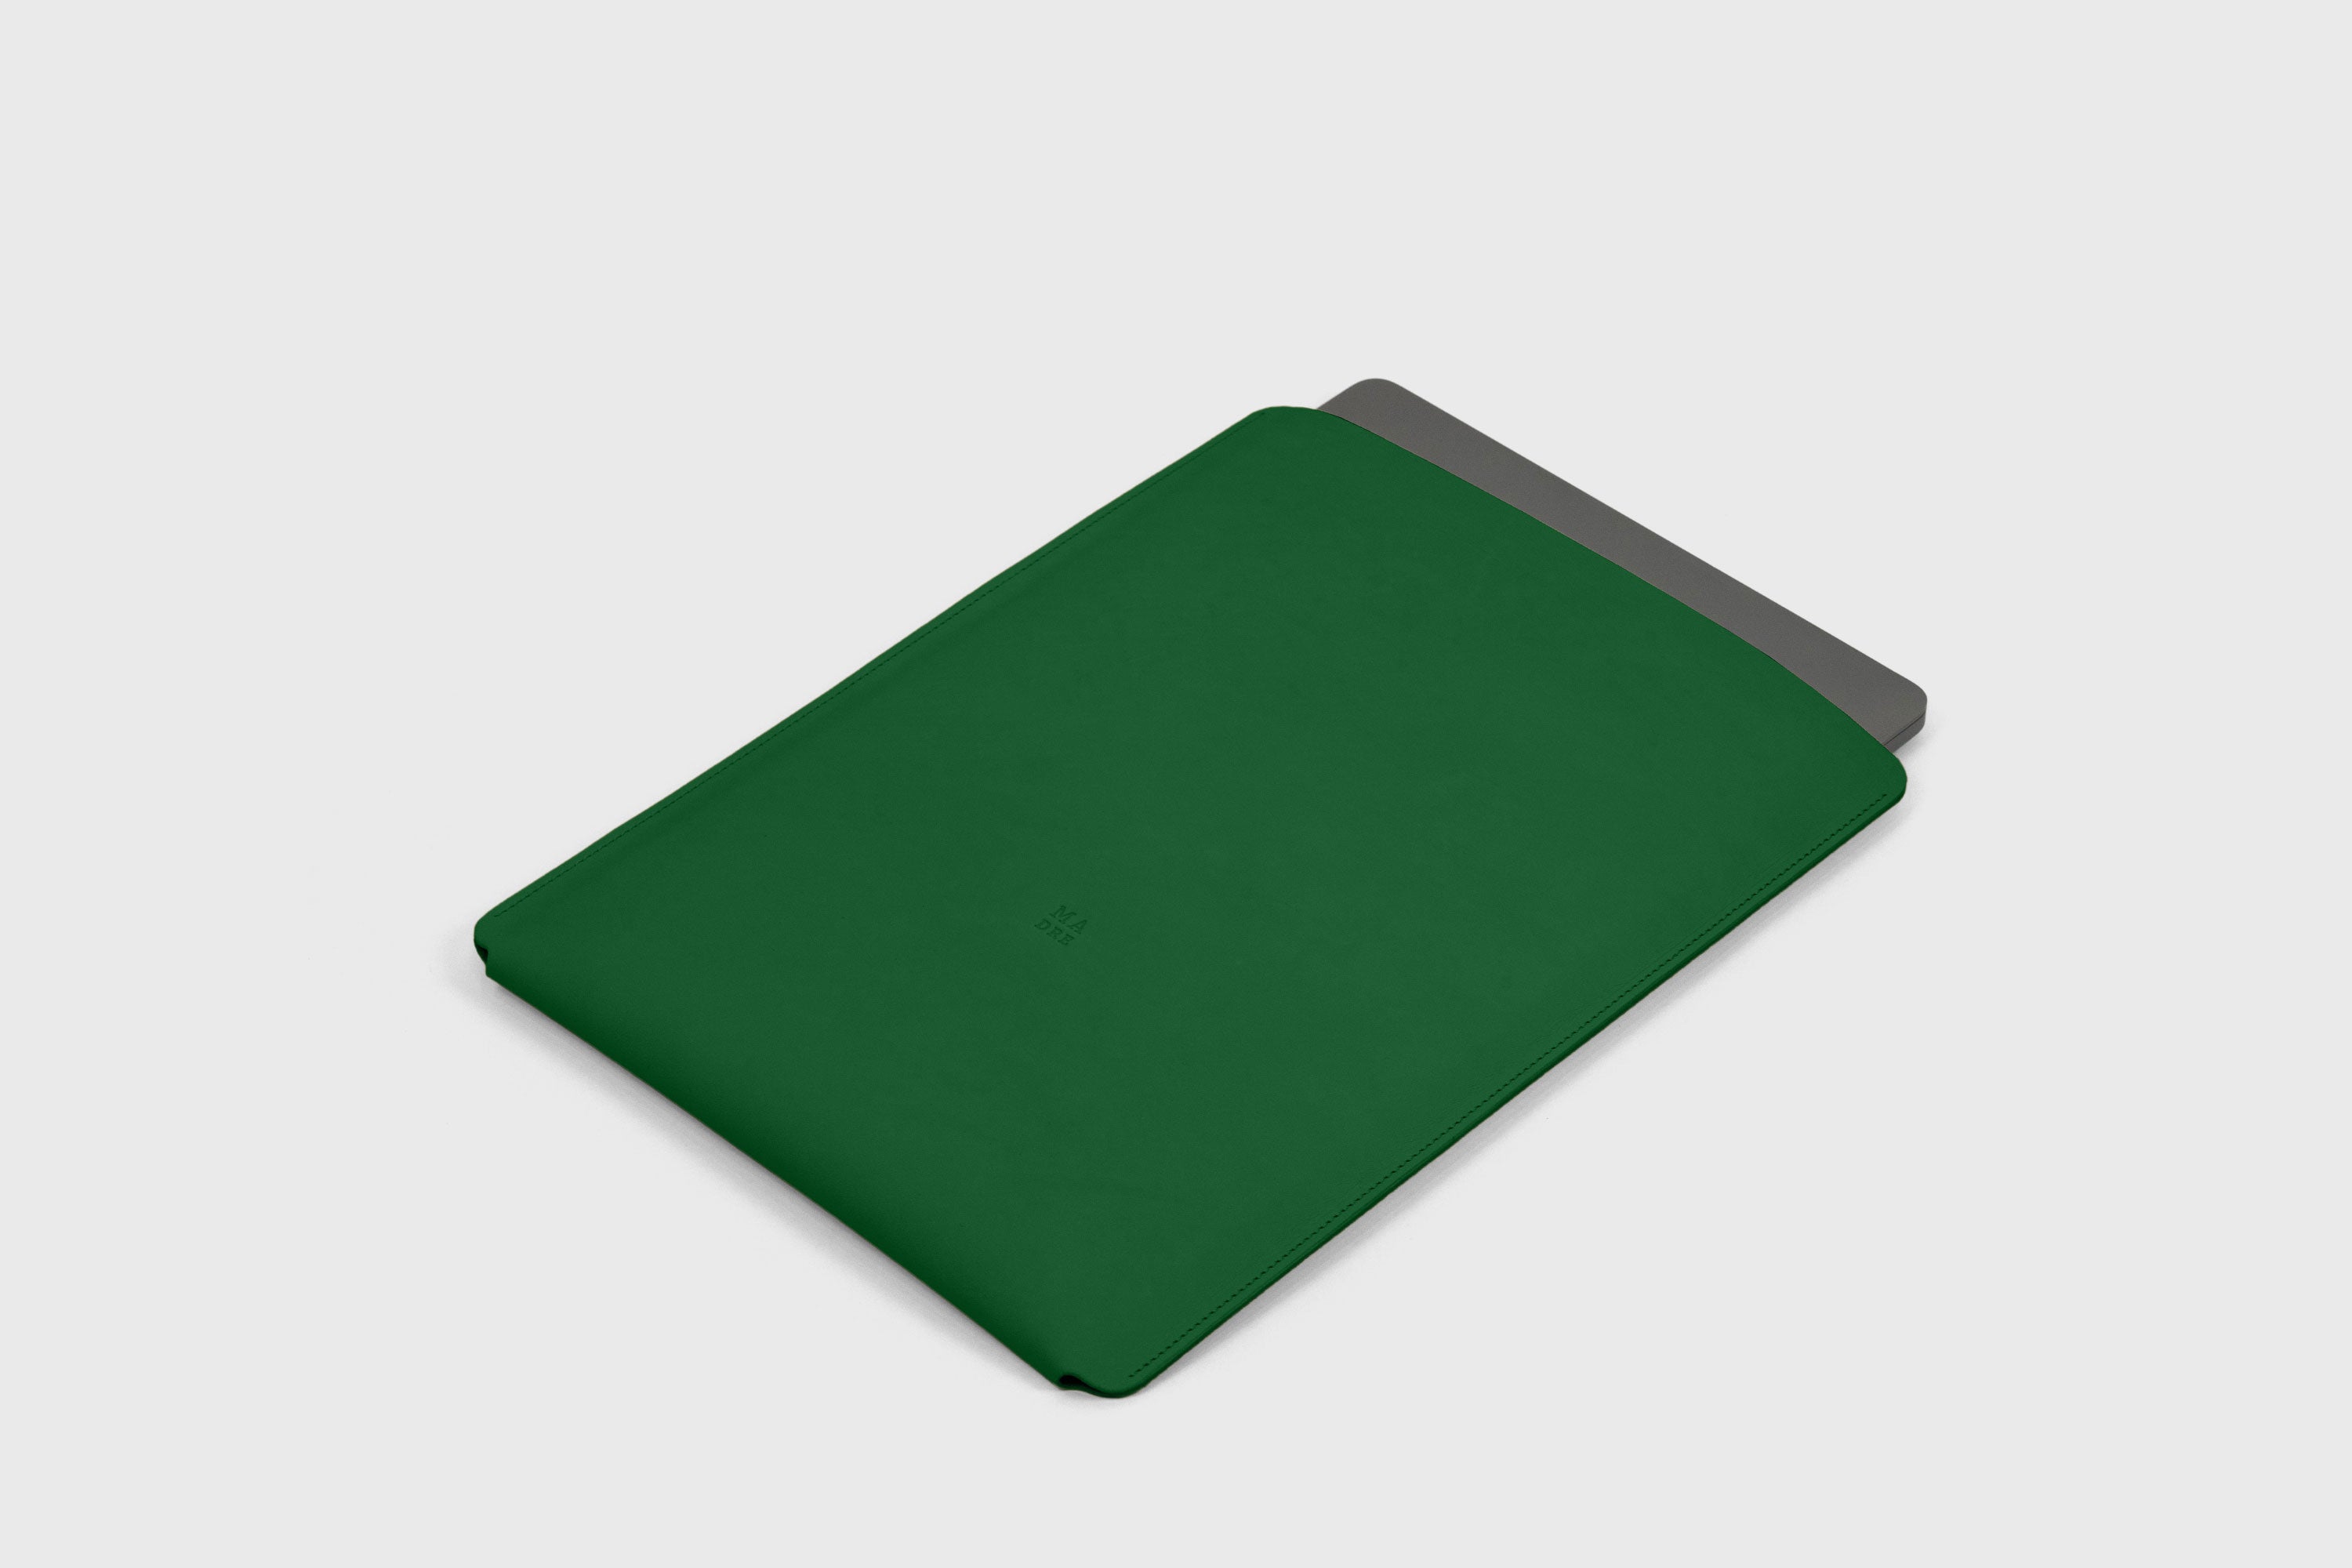 MacBook Air 15 Inch Sleeve Leather Grass Green Colour Minimalistic Design Premium Quality By Atelier Madre Manuel Dreesmann Atelier Madre Barcelona Spain